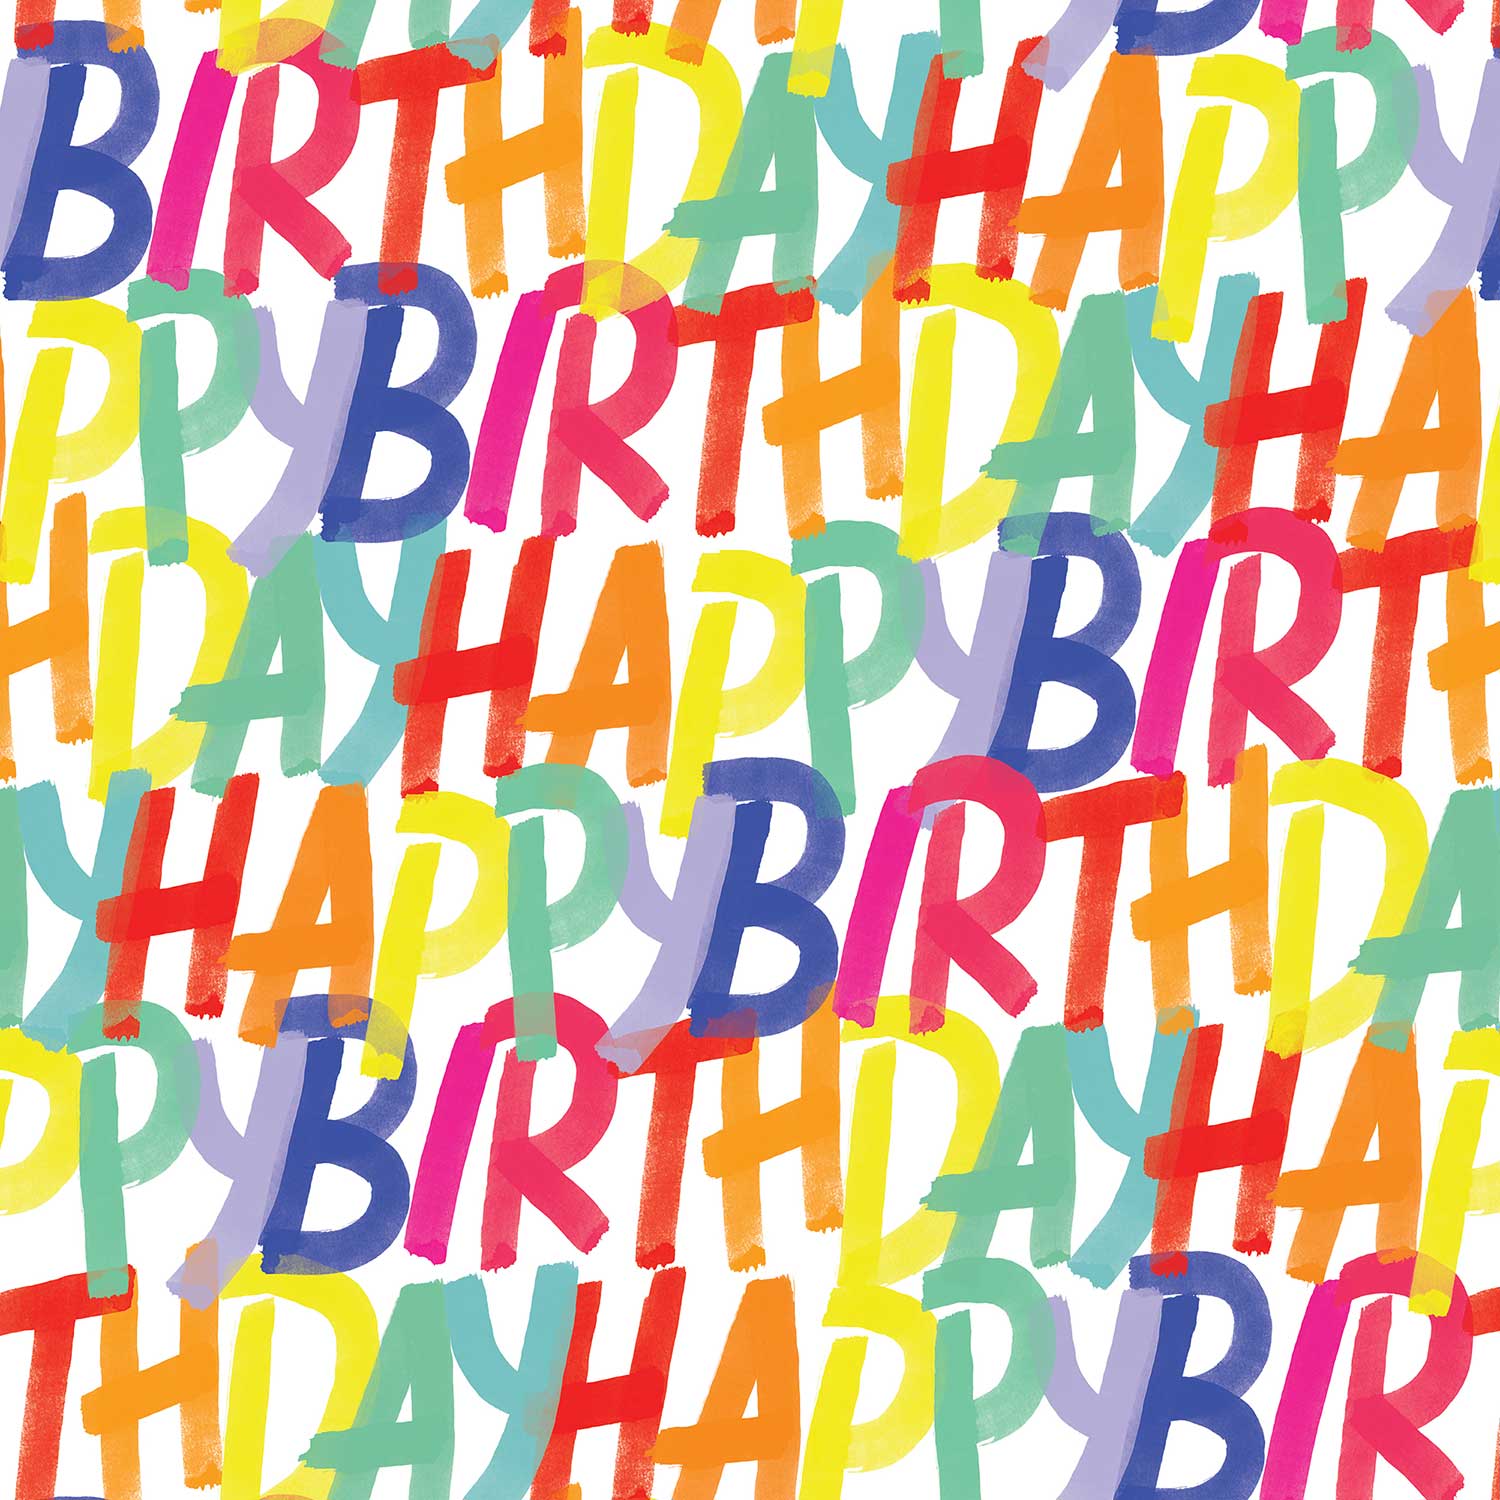 Happy Birthday Wrapping Paper